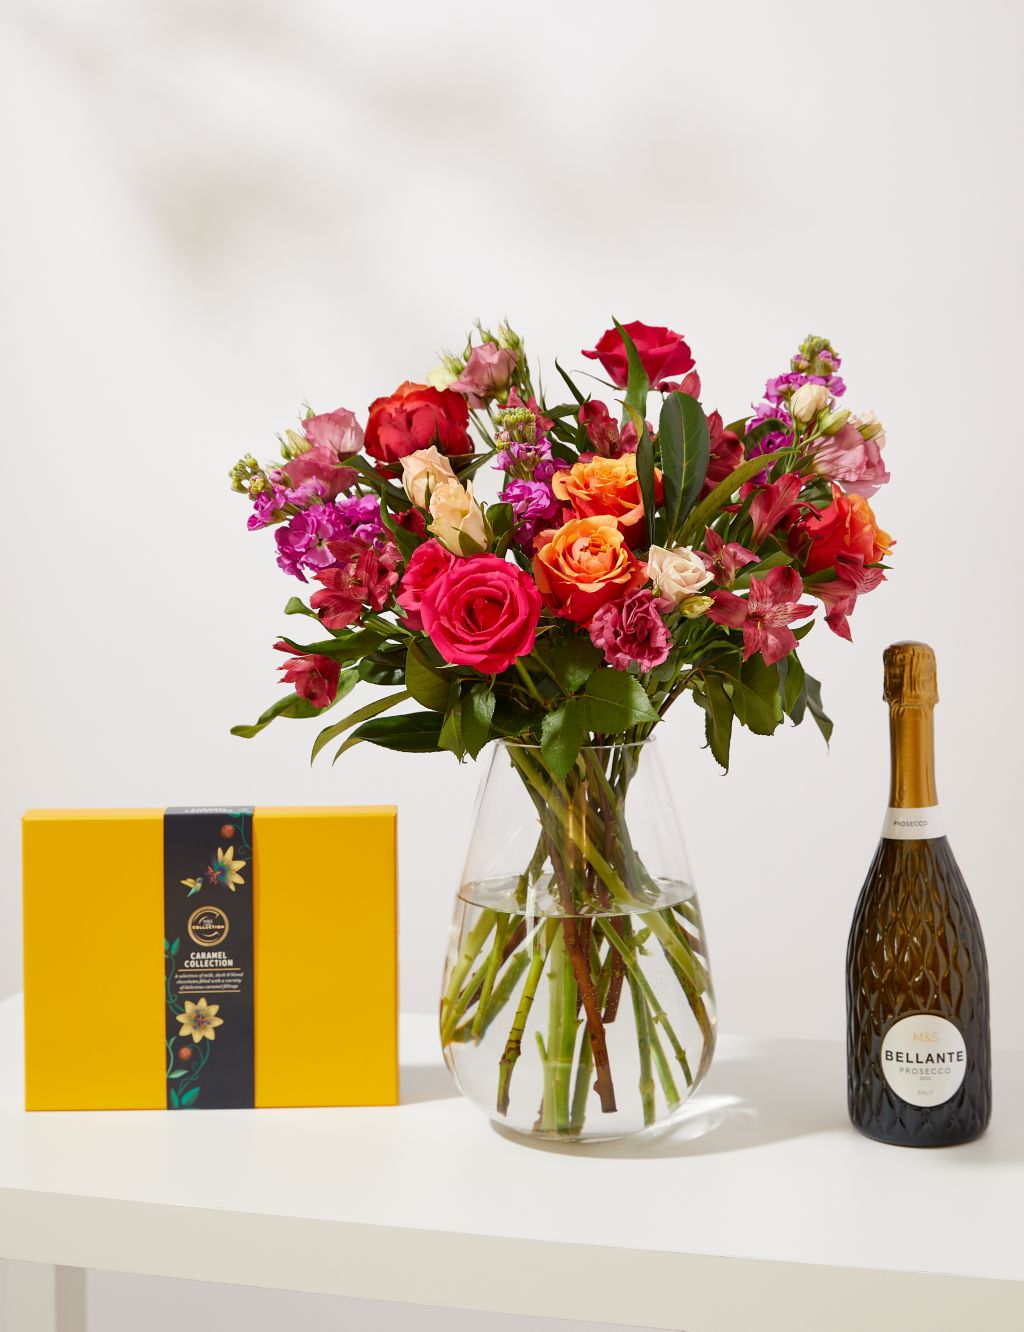 Roses, Iris & Stock Bright Bouquet with Prosecco & Collection Caramel Chocolates